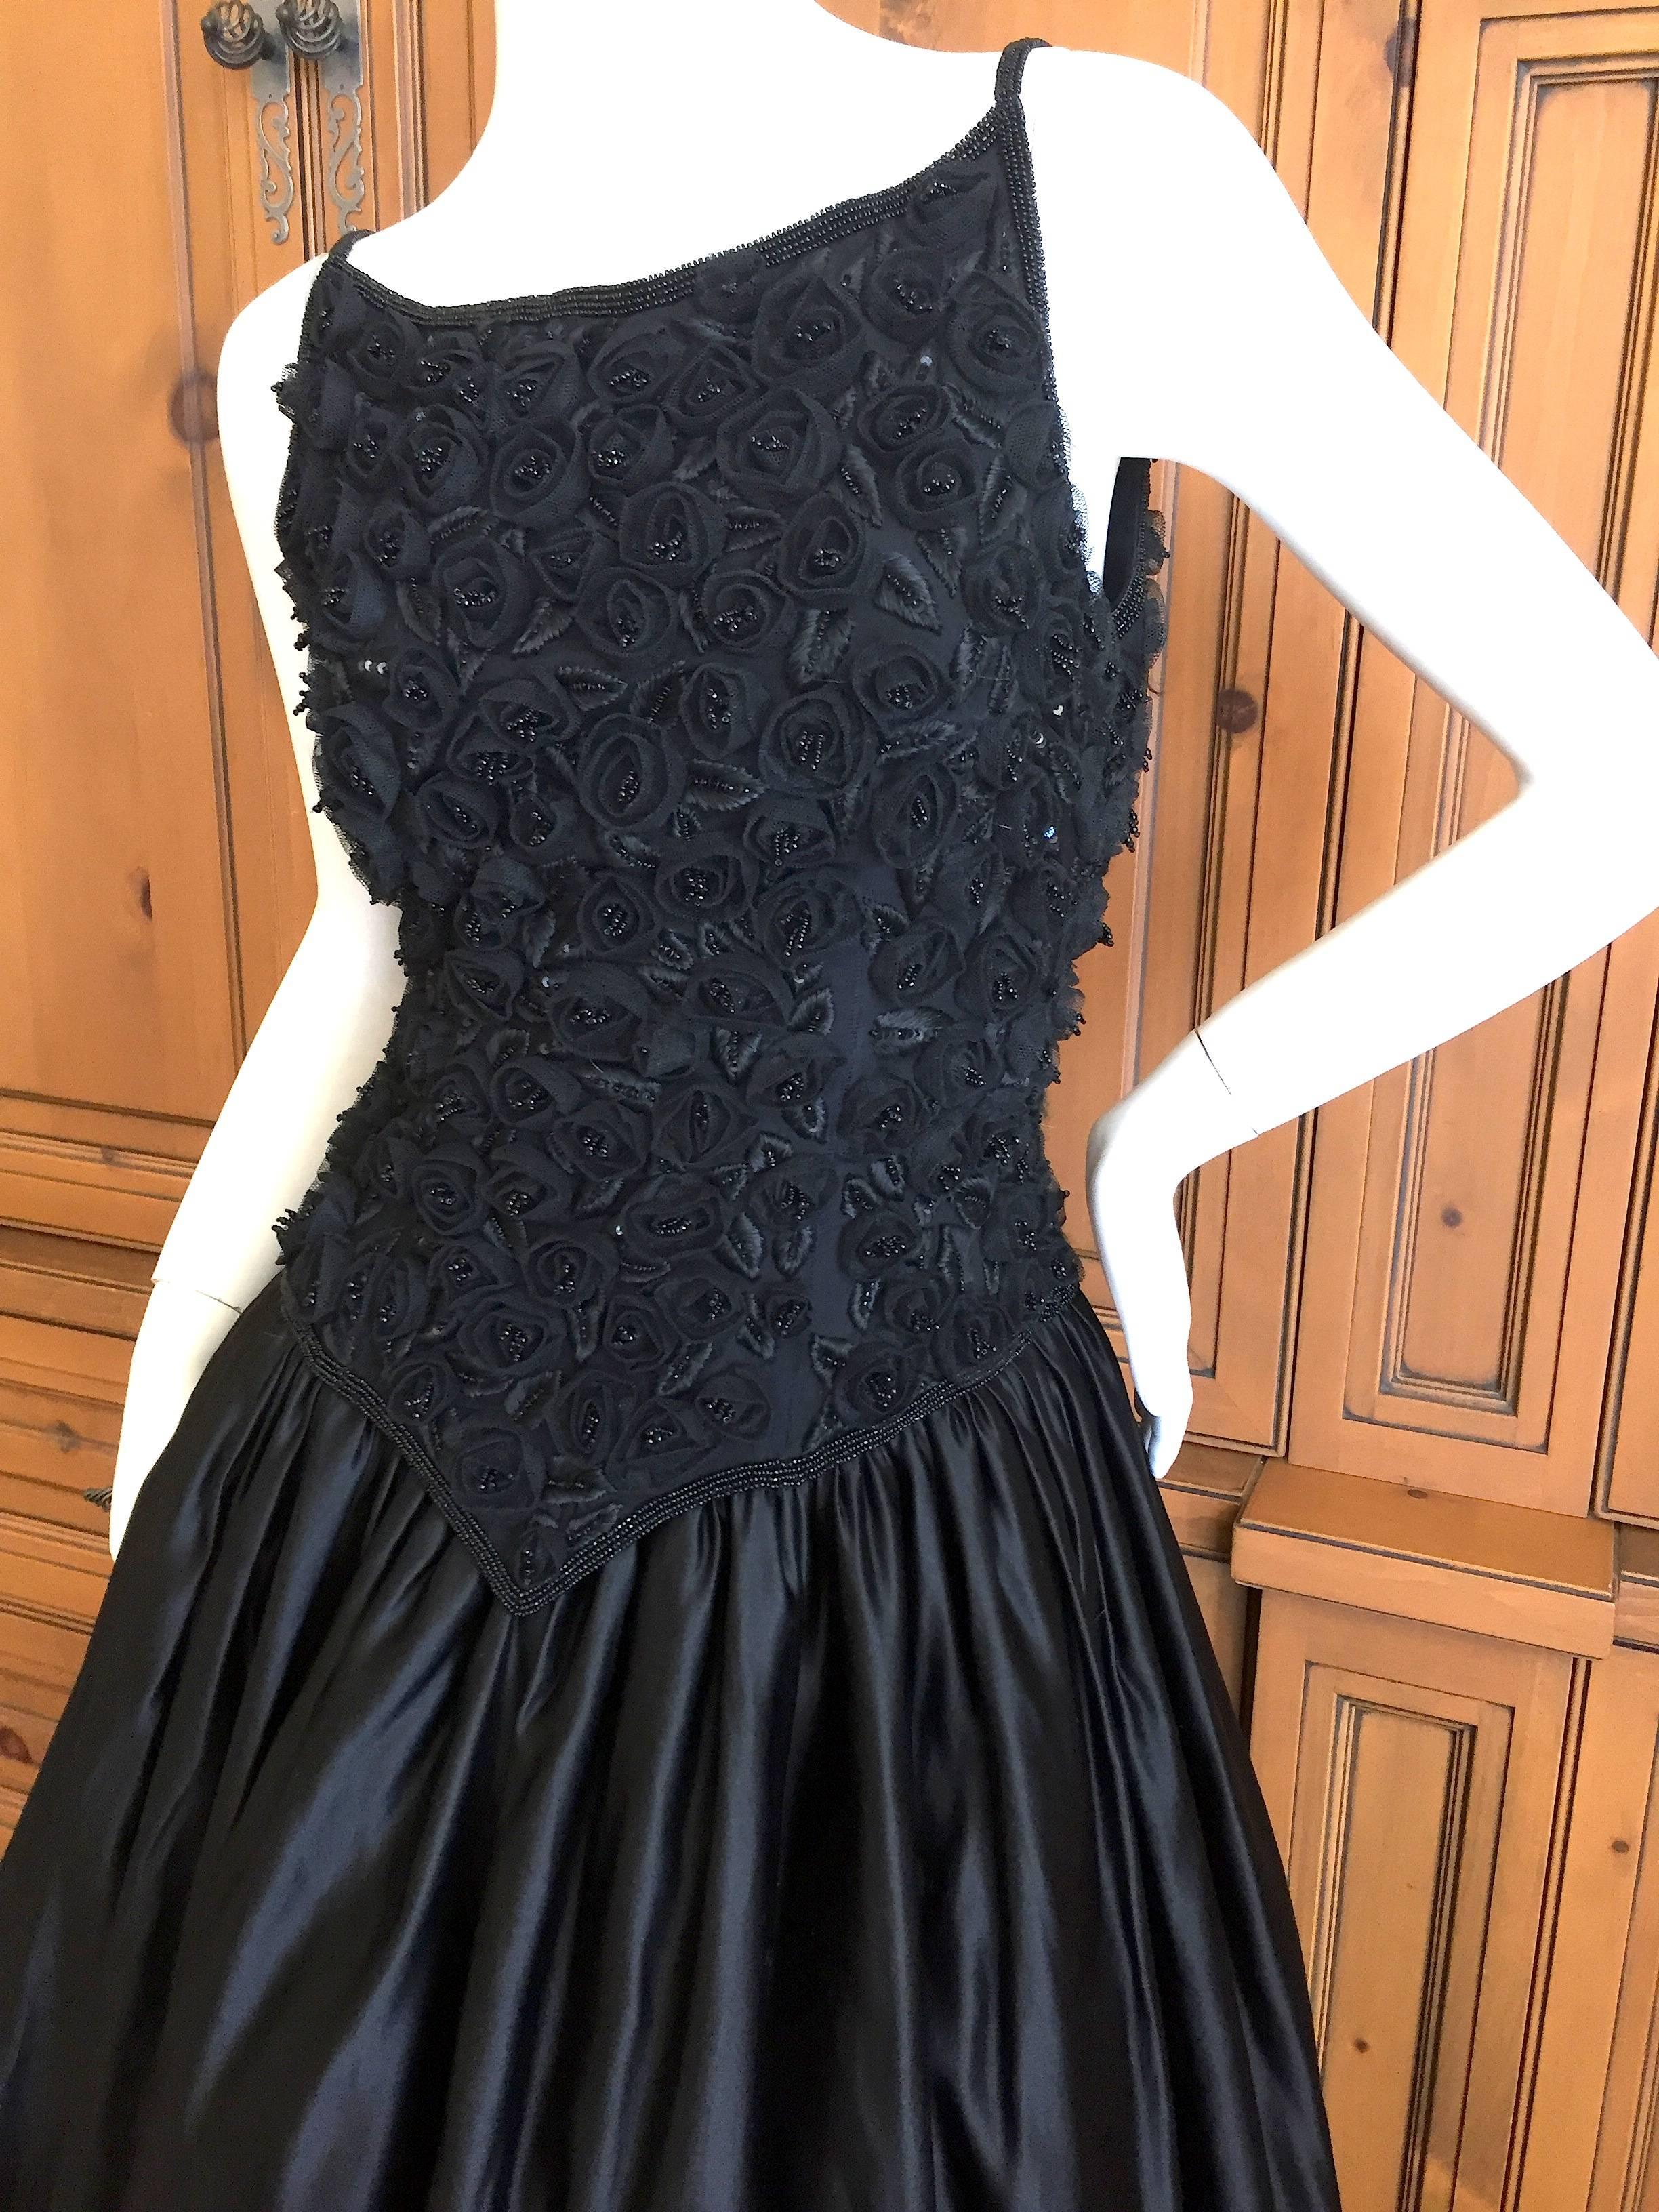 Yves Saint Laurent Numbered Haute Couture Evening Dress 1